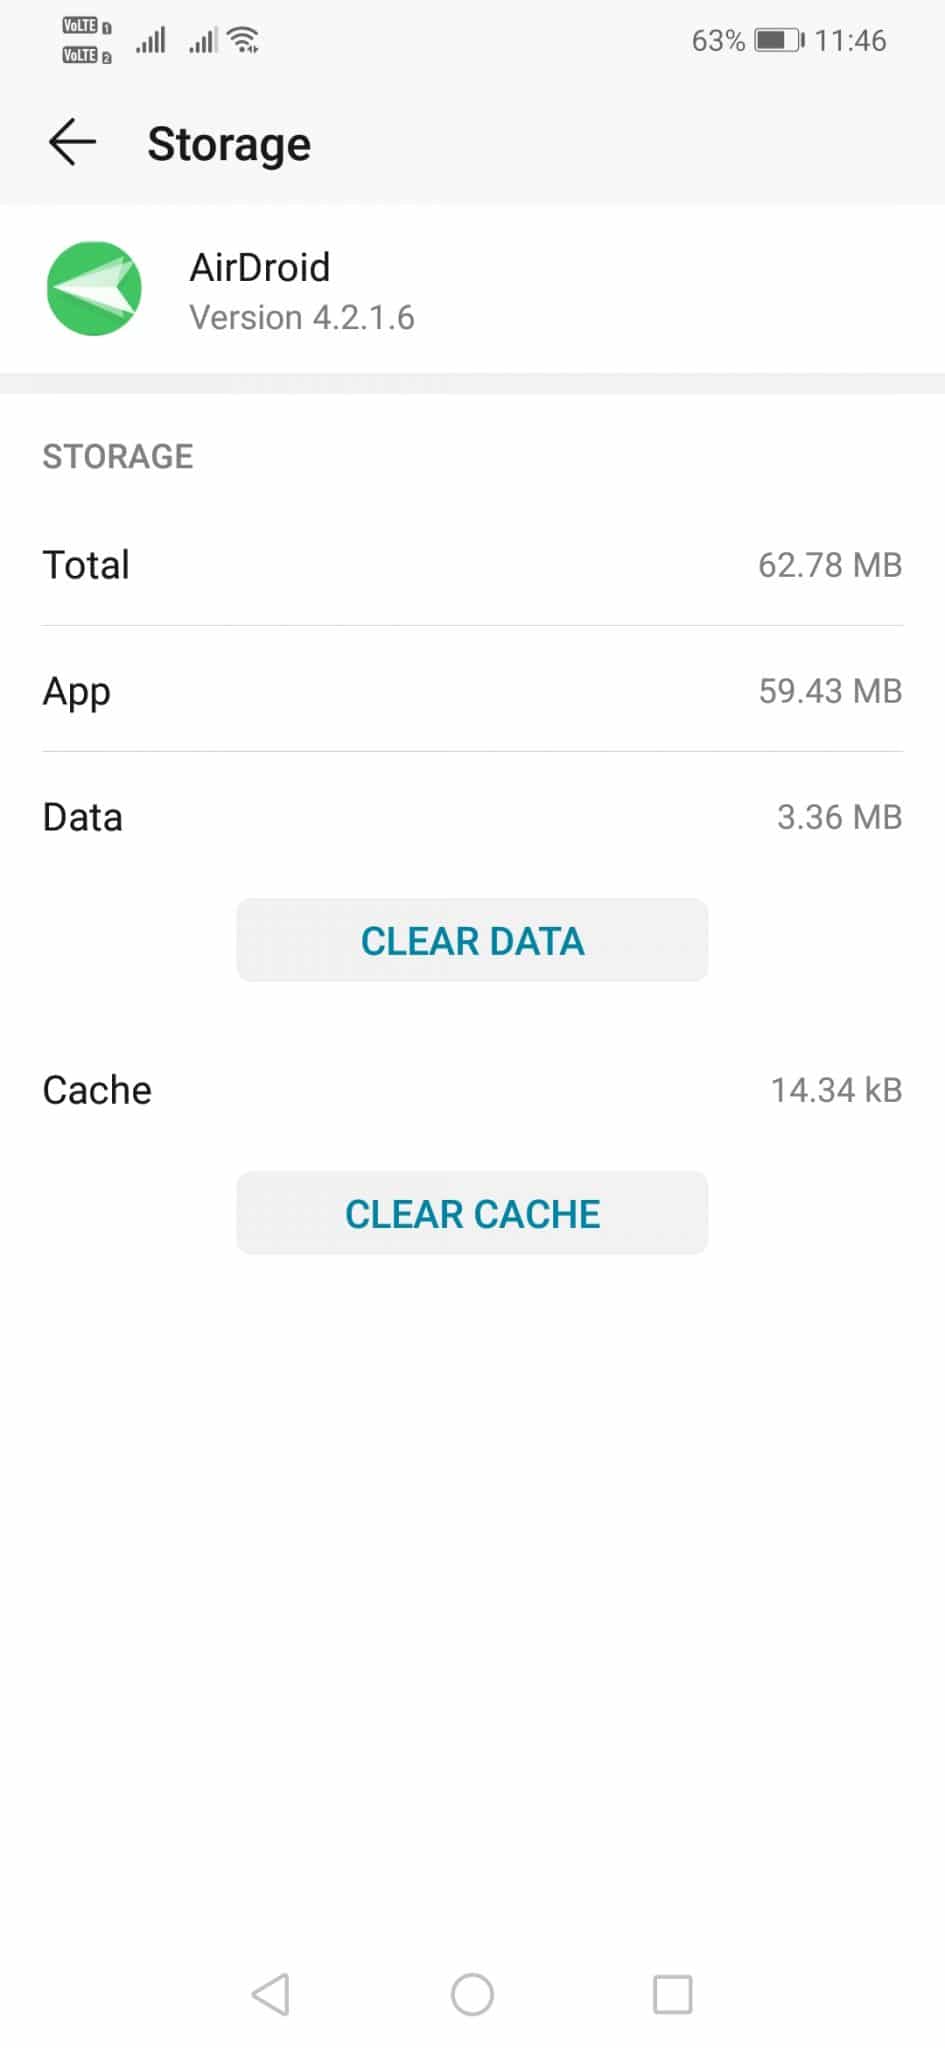 Tap on 'Clear Cache' button